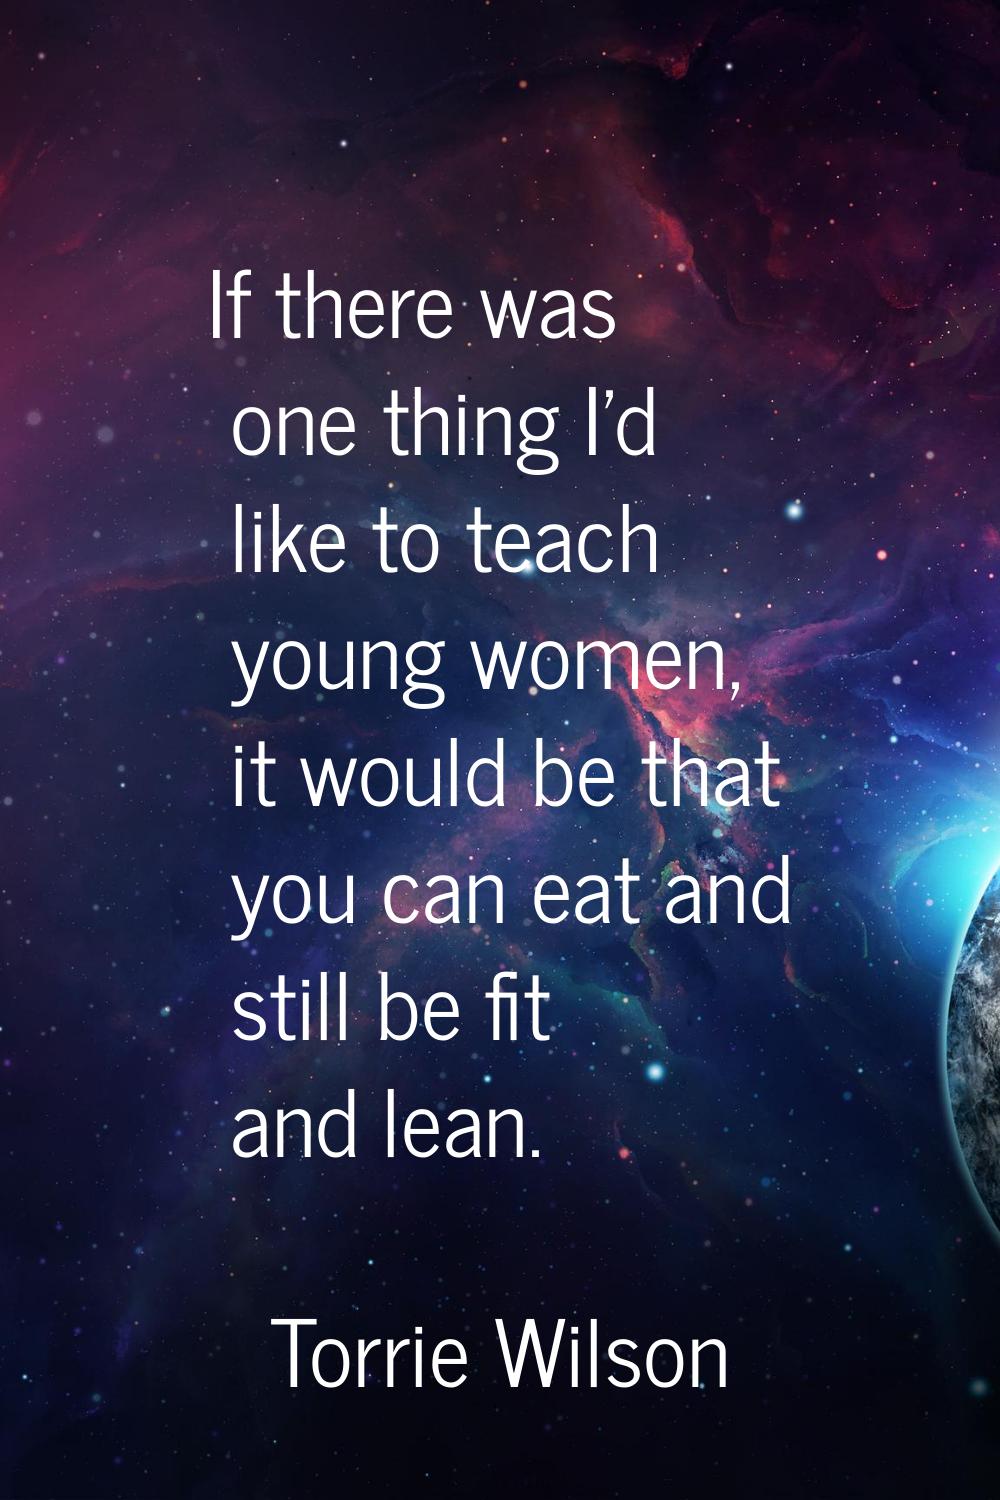 If there was one thing I'd like to teach young women, it would be that you can eat and still be fit